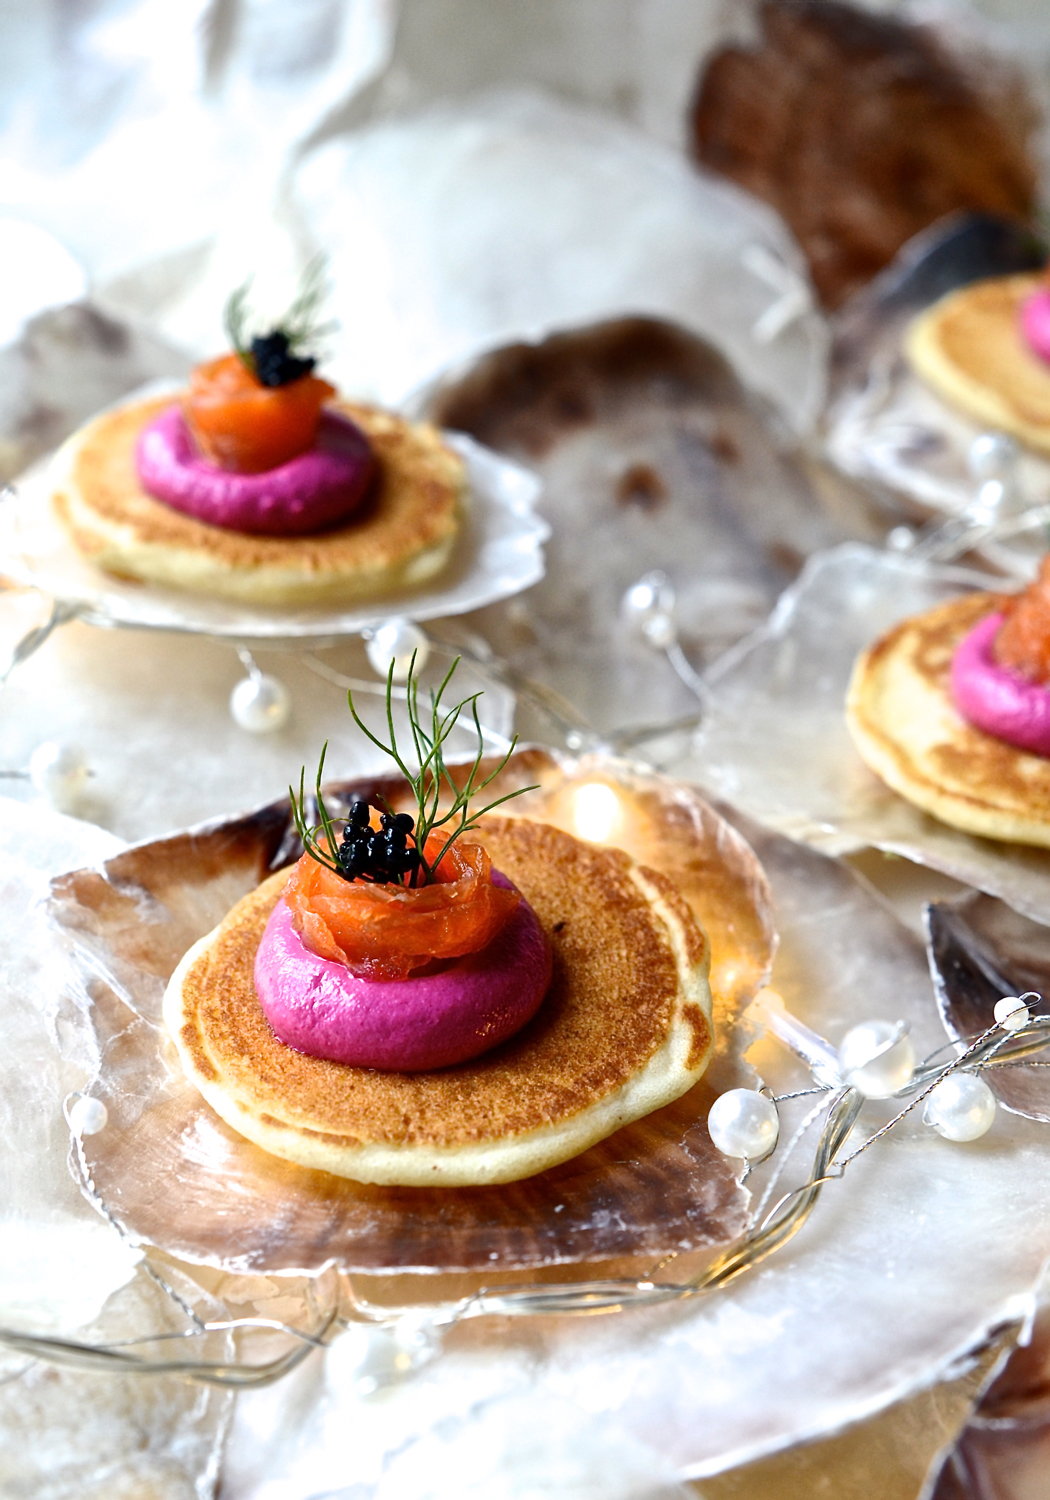 Salmon Blinis with beetroot mousse